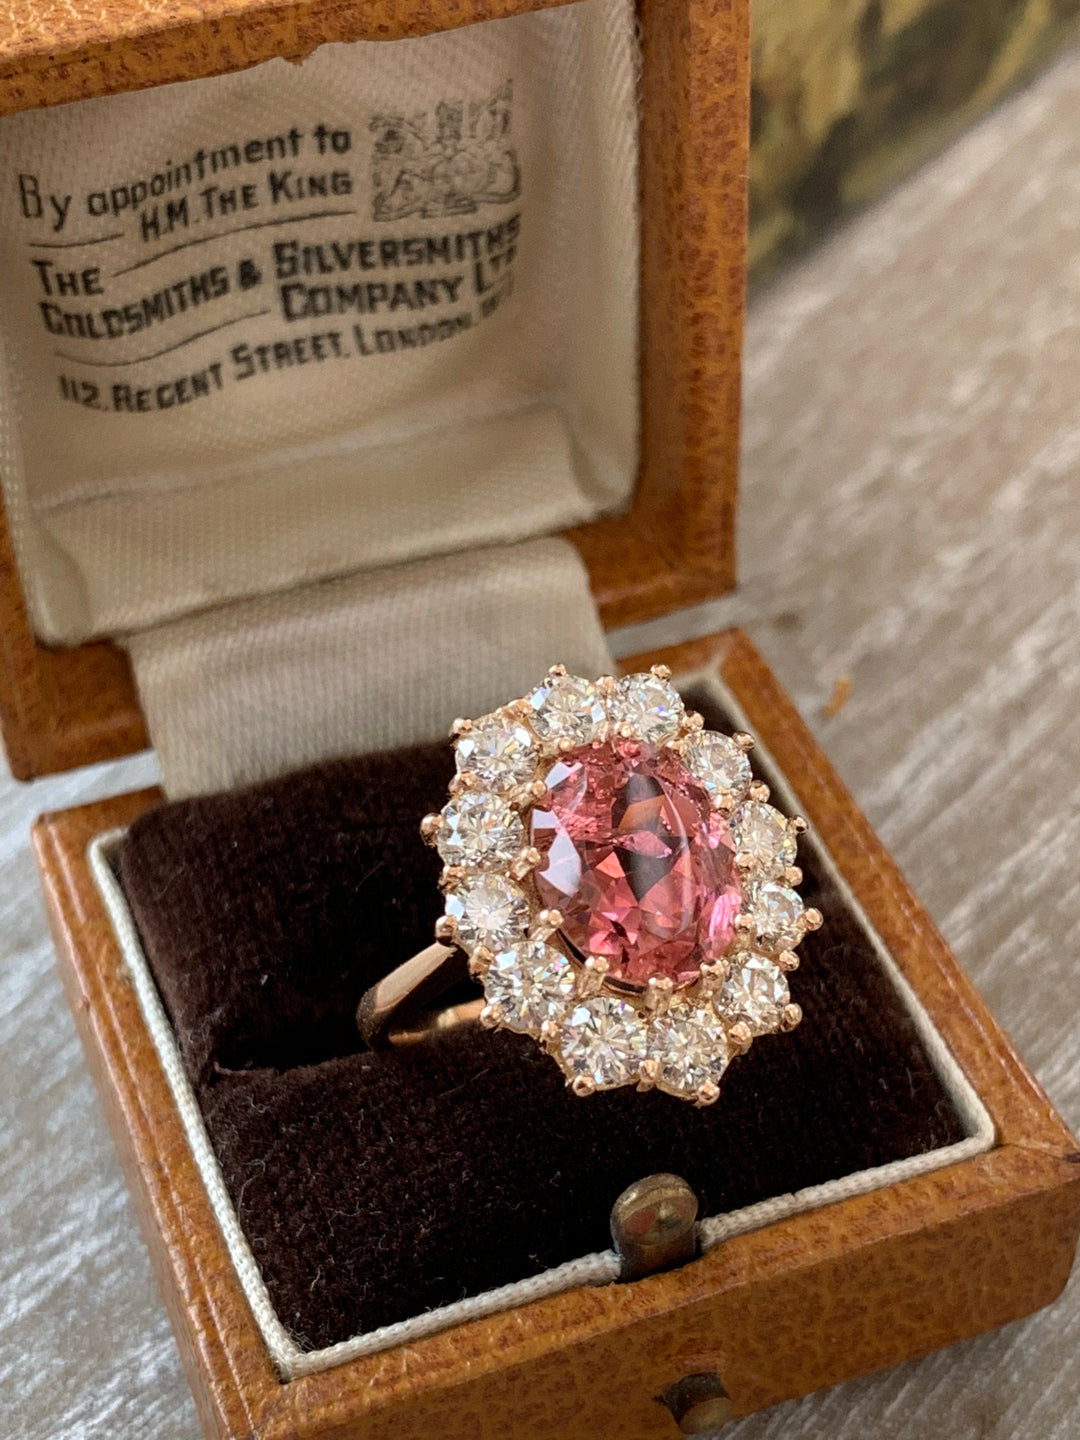 5.05 Carat Oval-Cut Pink Tourmaline and Diamond Halo Ring in 18K Rose Gold